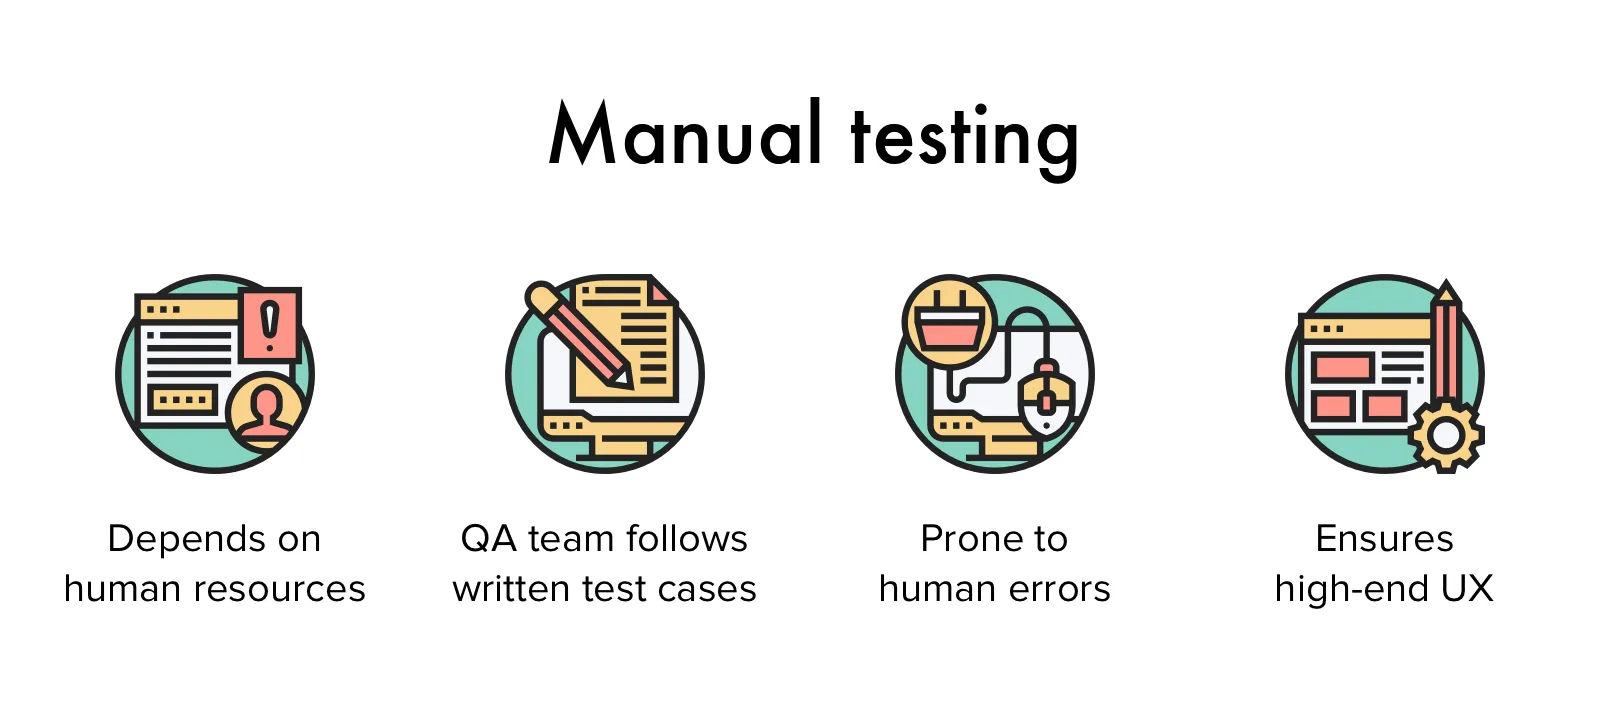 Manual testing how it works